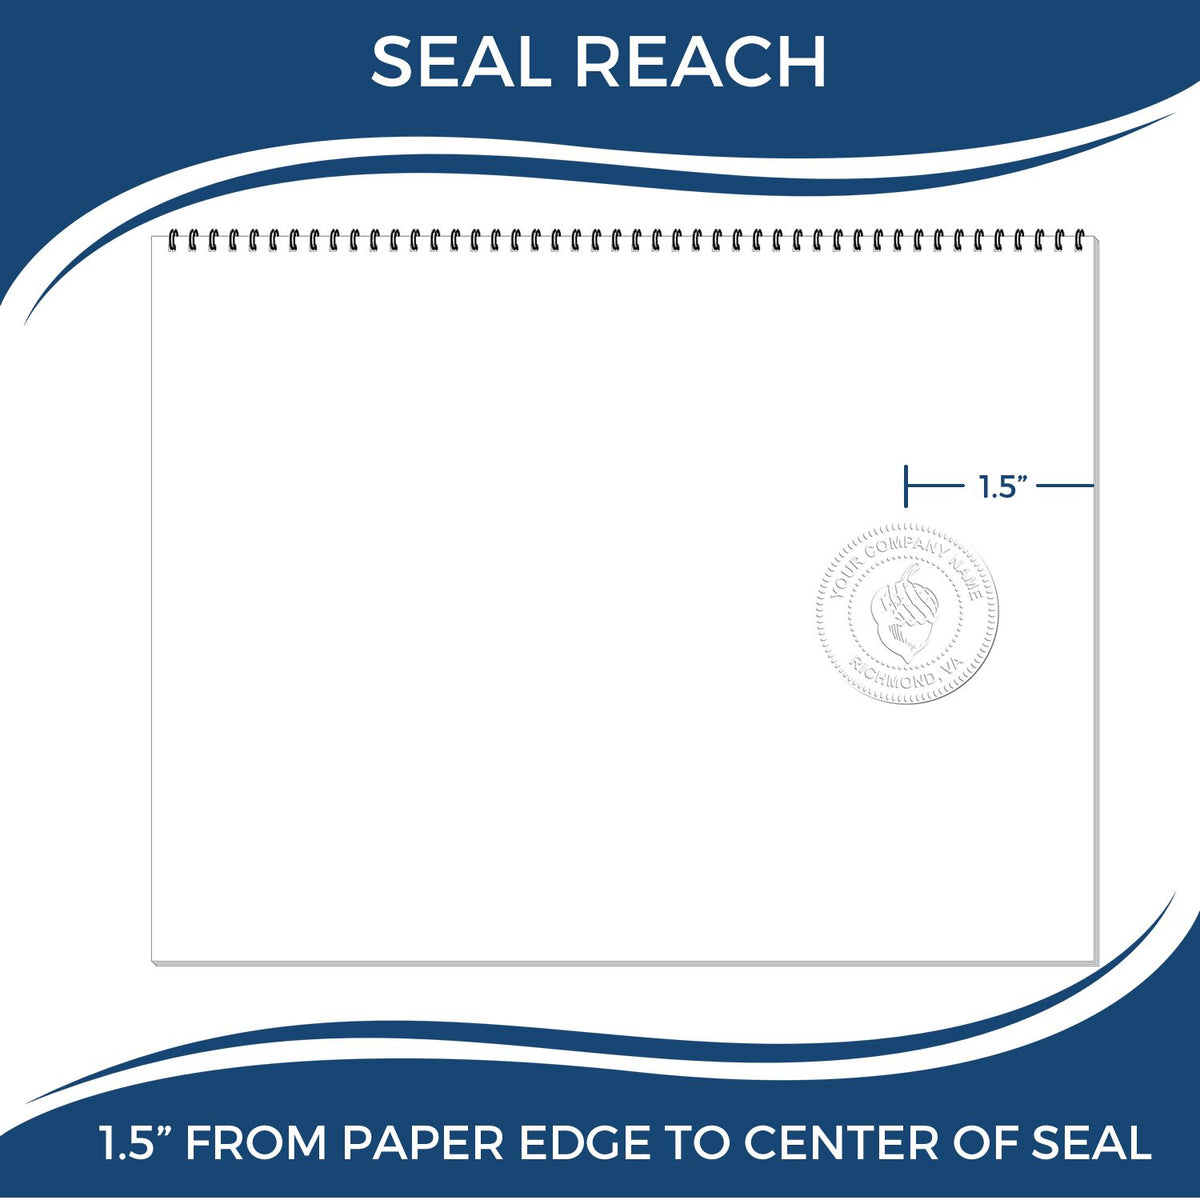 An infographic showing the seal reach which is represented by a ruler and a miniature seal image of the Gift Louisiana Architect Seal